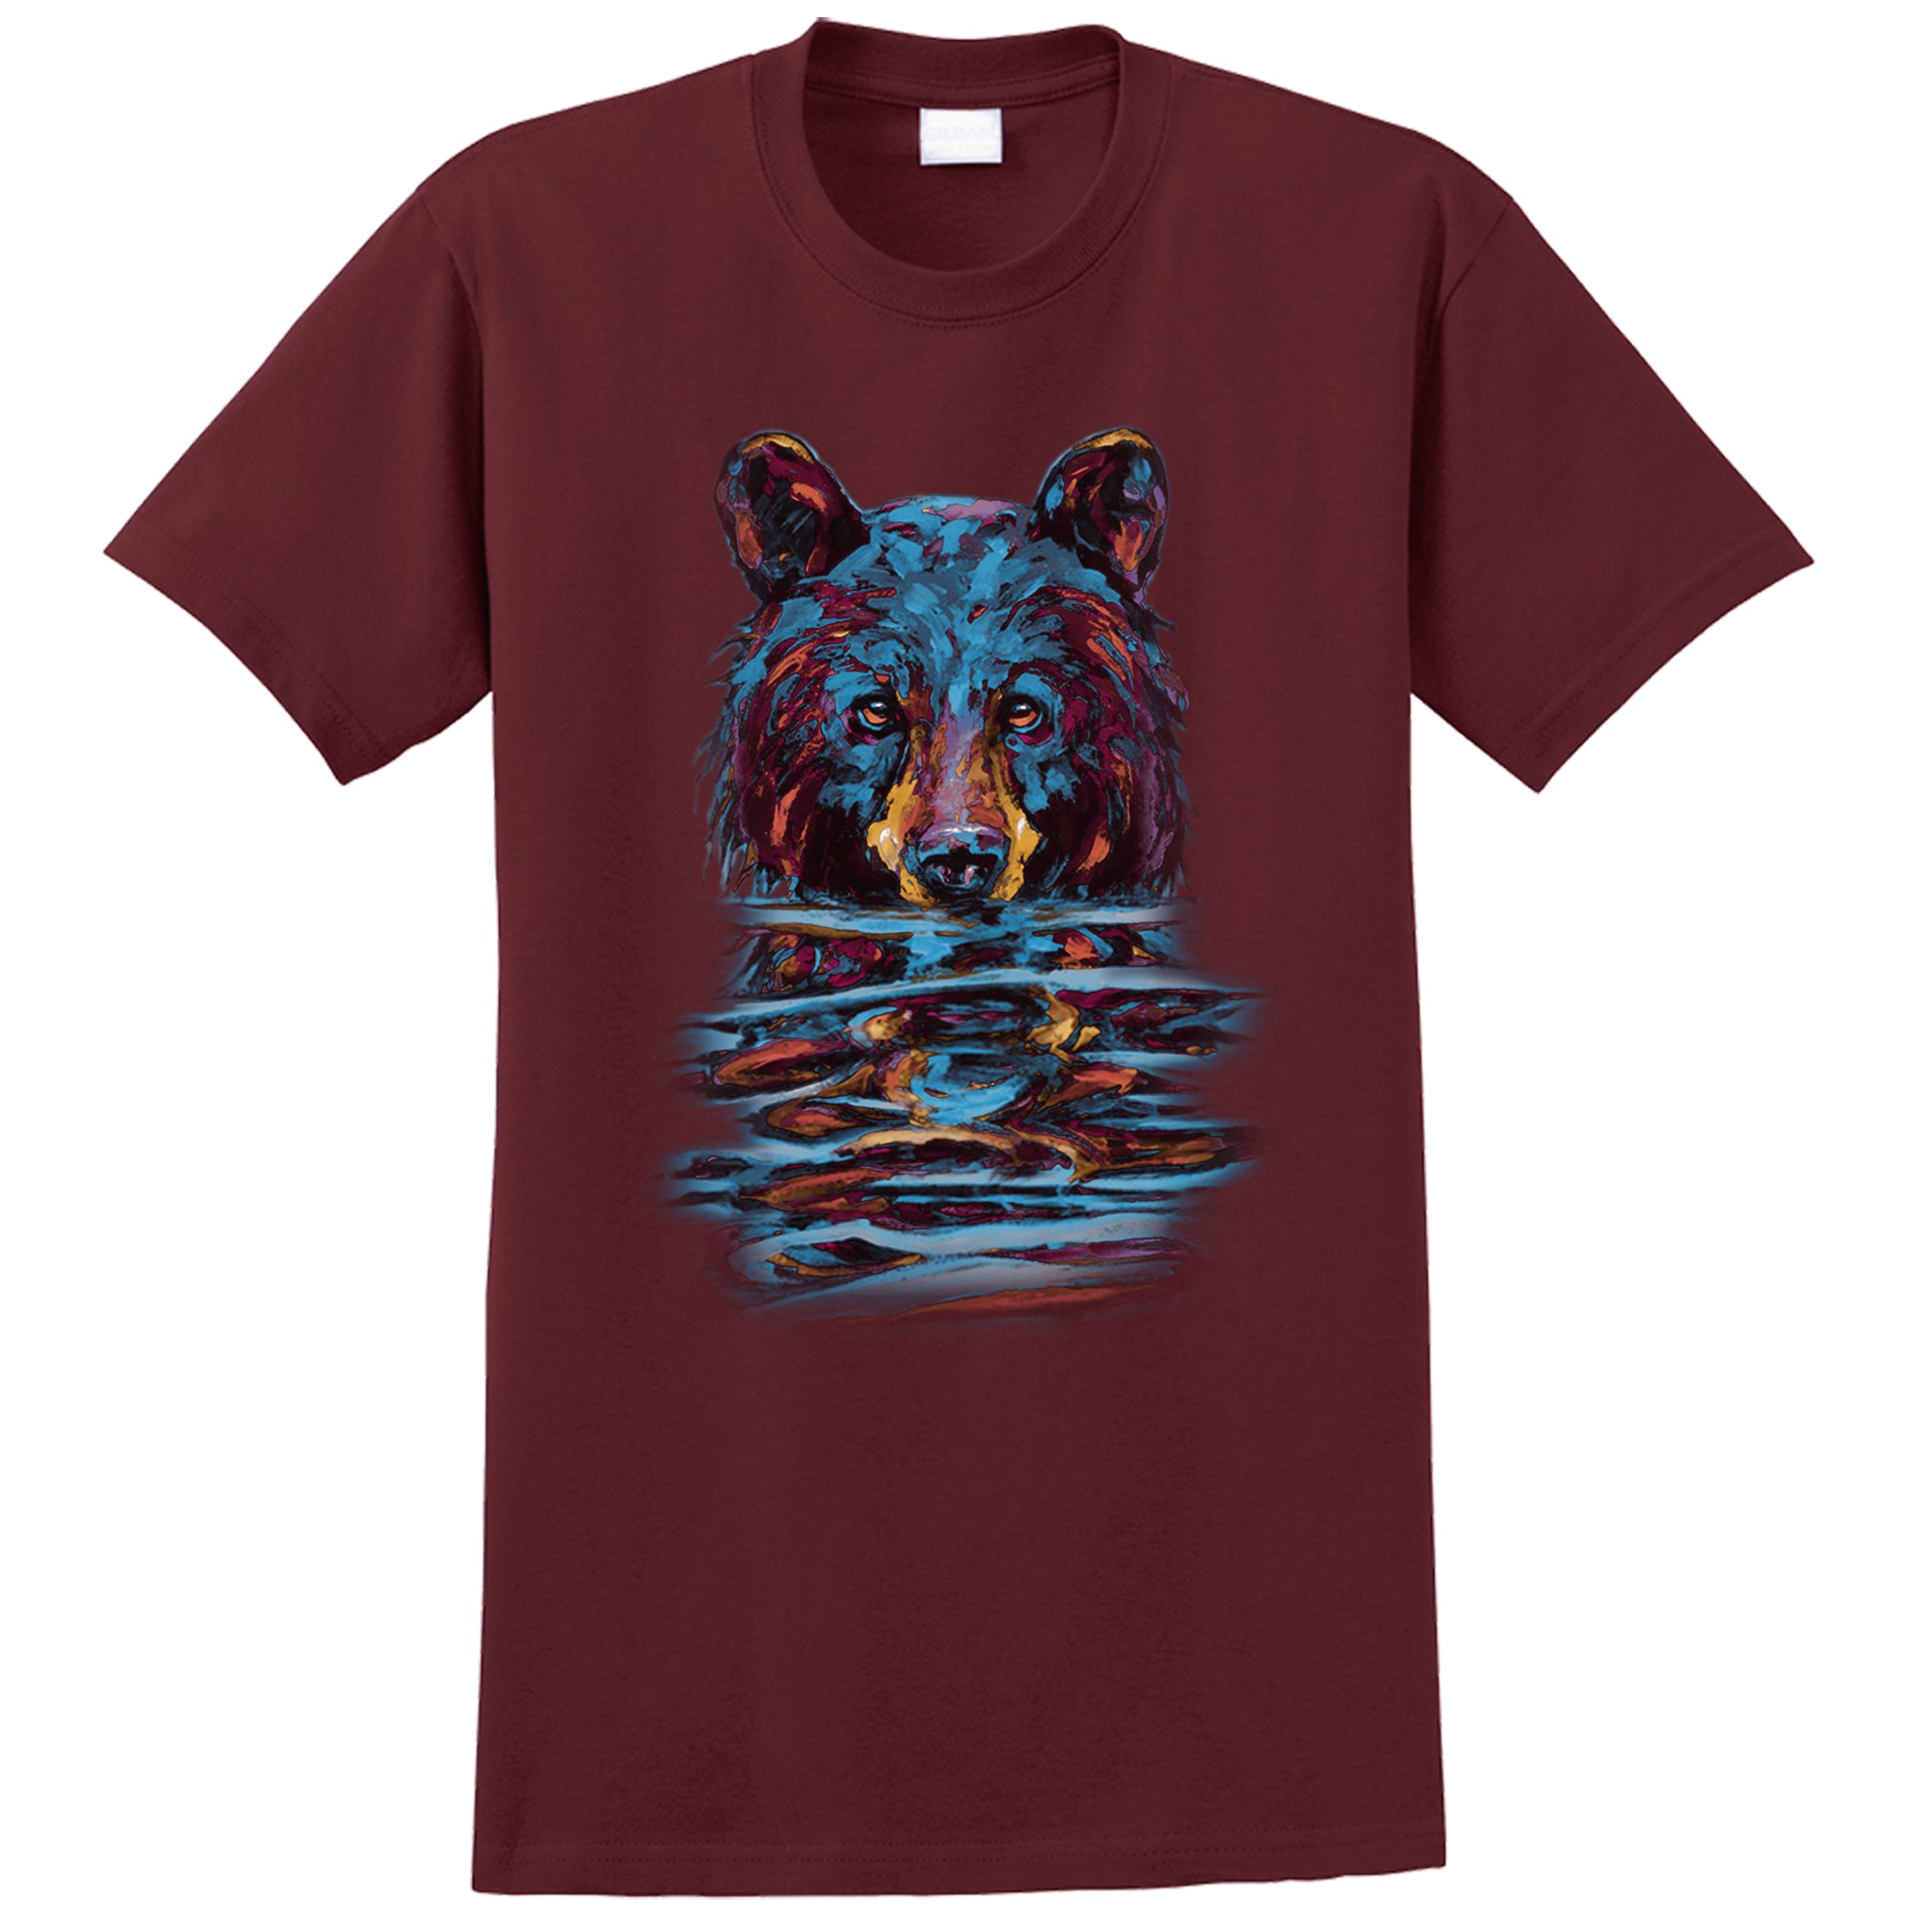 Maroon T-Shirt with a Black Bear graphic printed on it. 